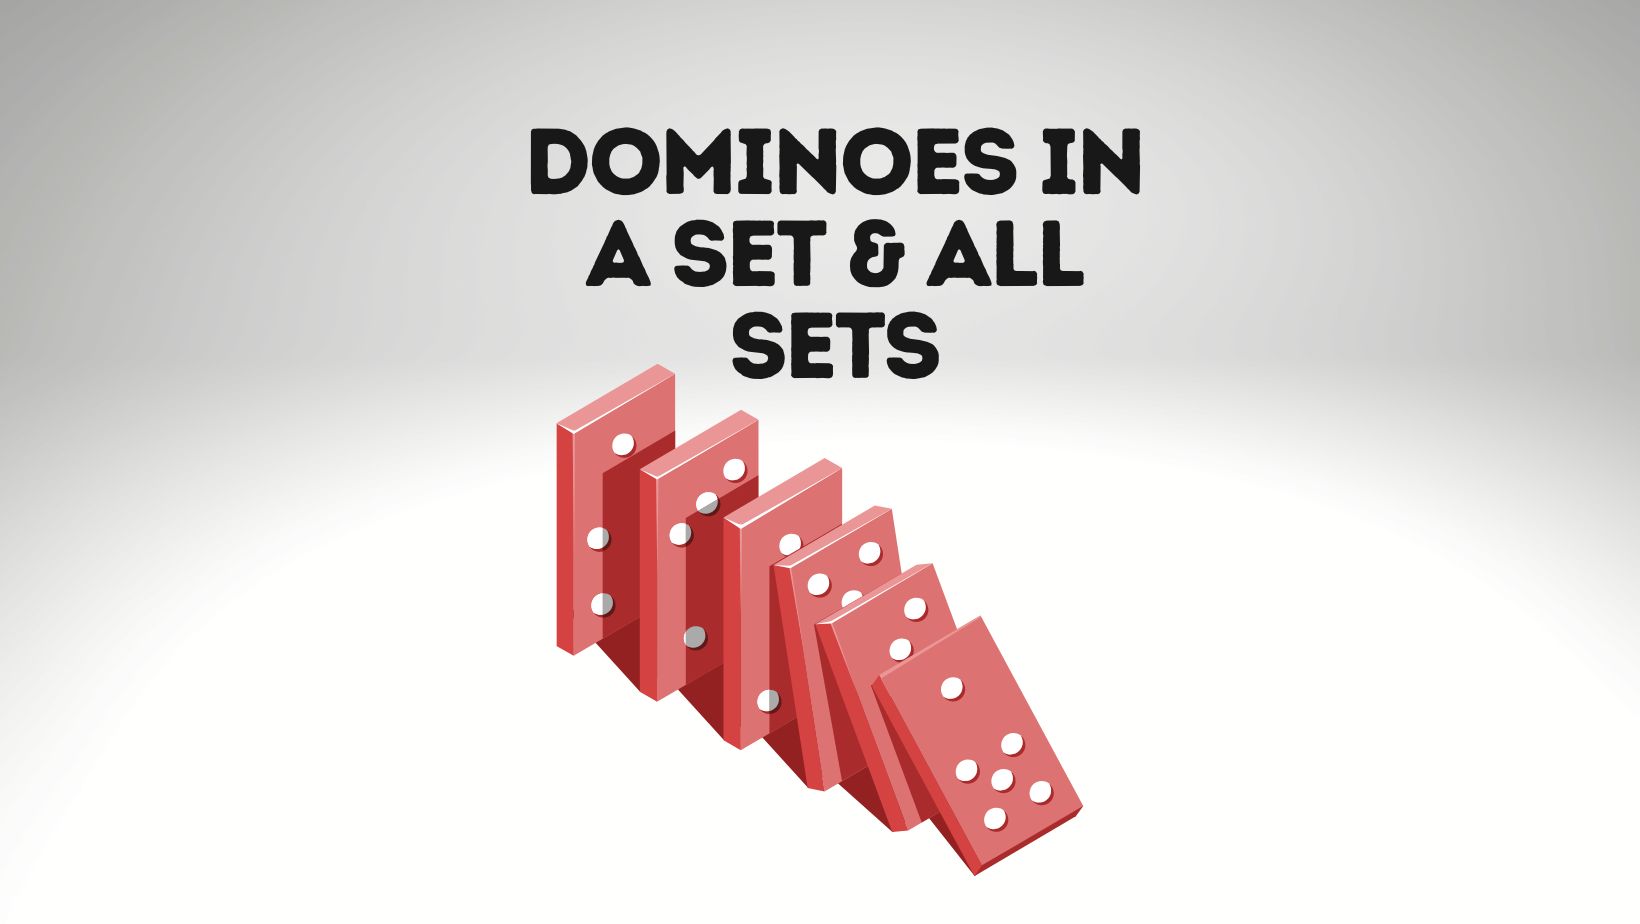 How Many Dominoes Are In A Set AND All Sets